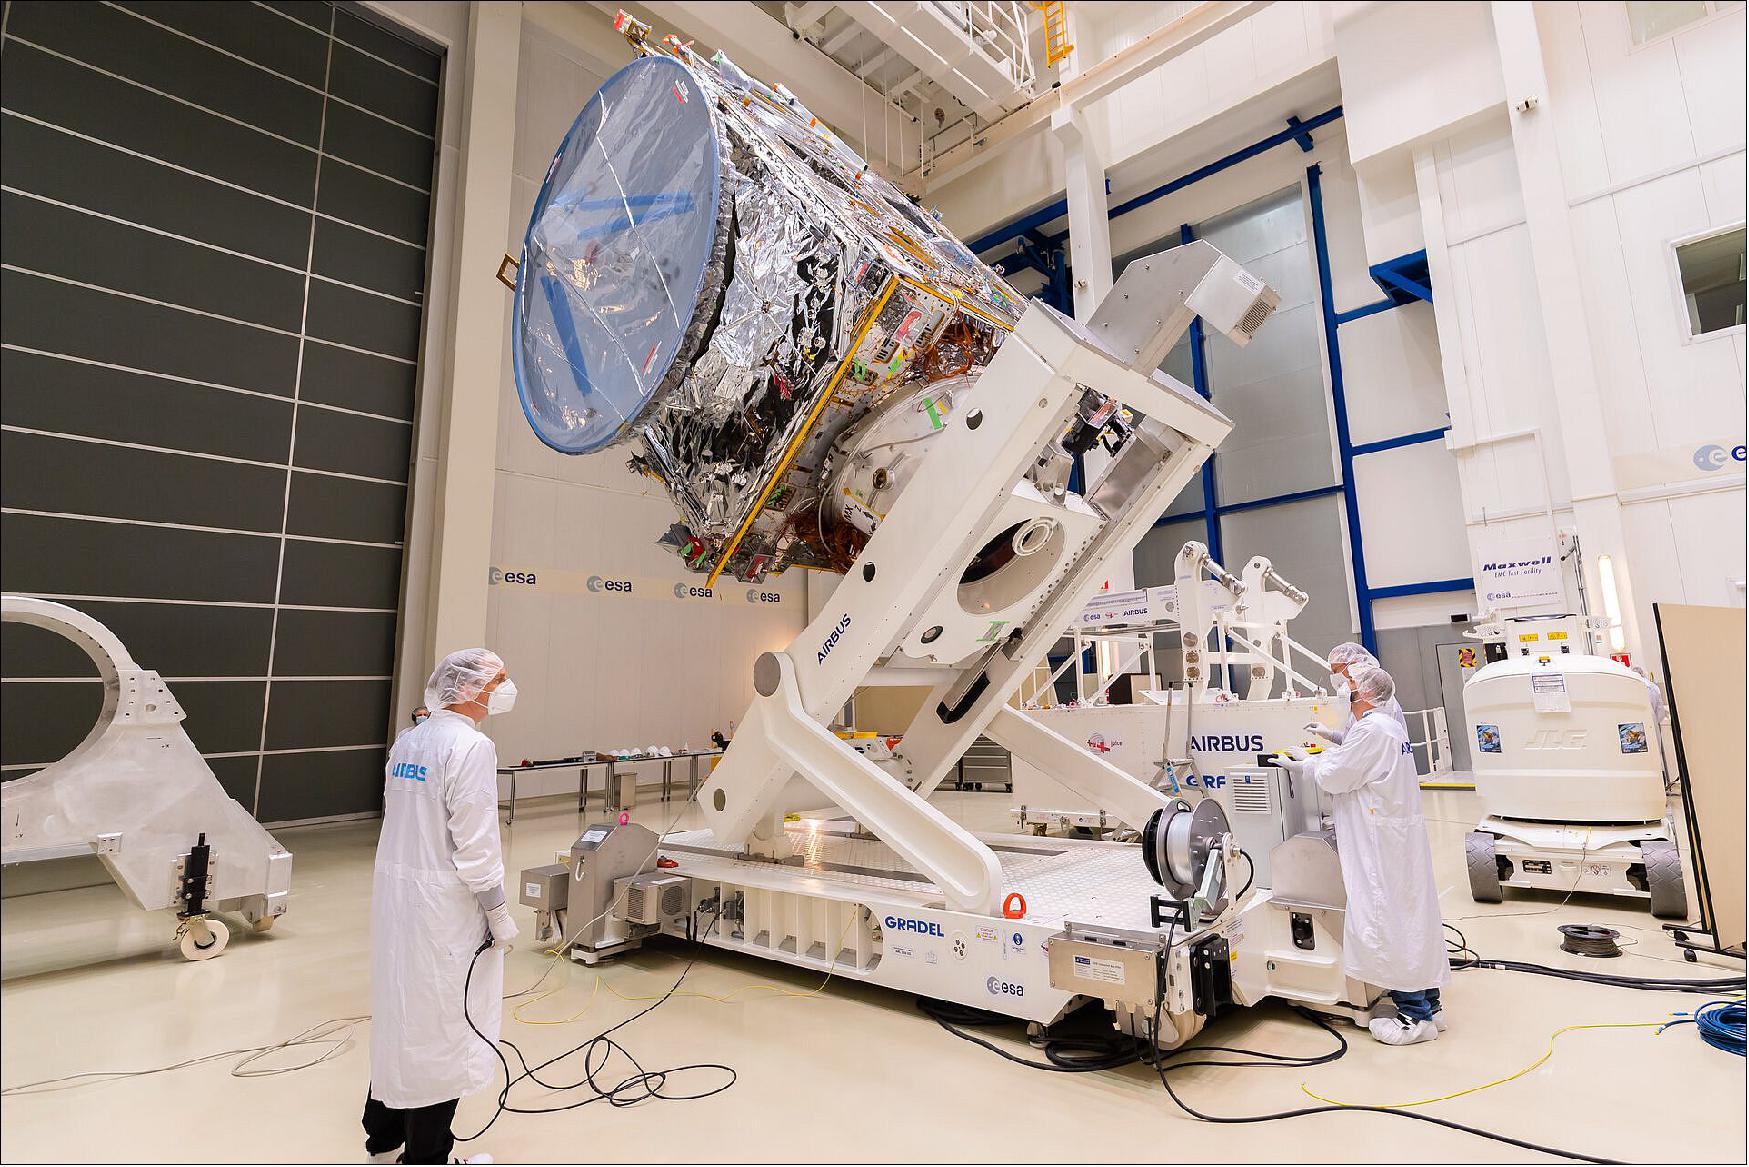 Figure 12: The multi-purpose trolley allows the spacecraft to be rotated and titled, providing better access to the engineers for integration operations and preparation for testing, and in general to facilitate the work on the different sides of the spacecraft. The trolley is made of non-magnetic material, to comply to the strict magnetic cleanliness requirements of the spacecraft (image credit: ESA-SJM Photography)